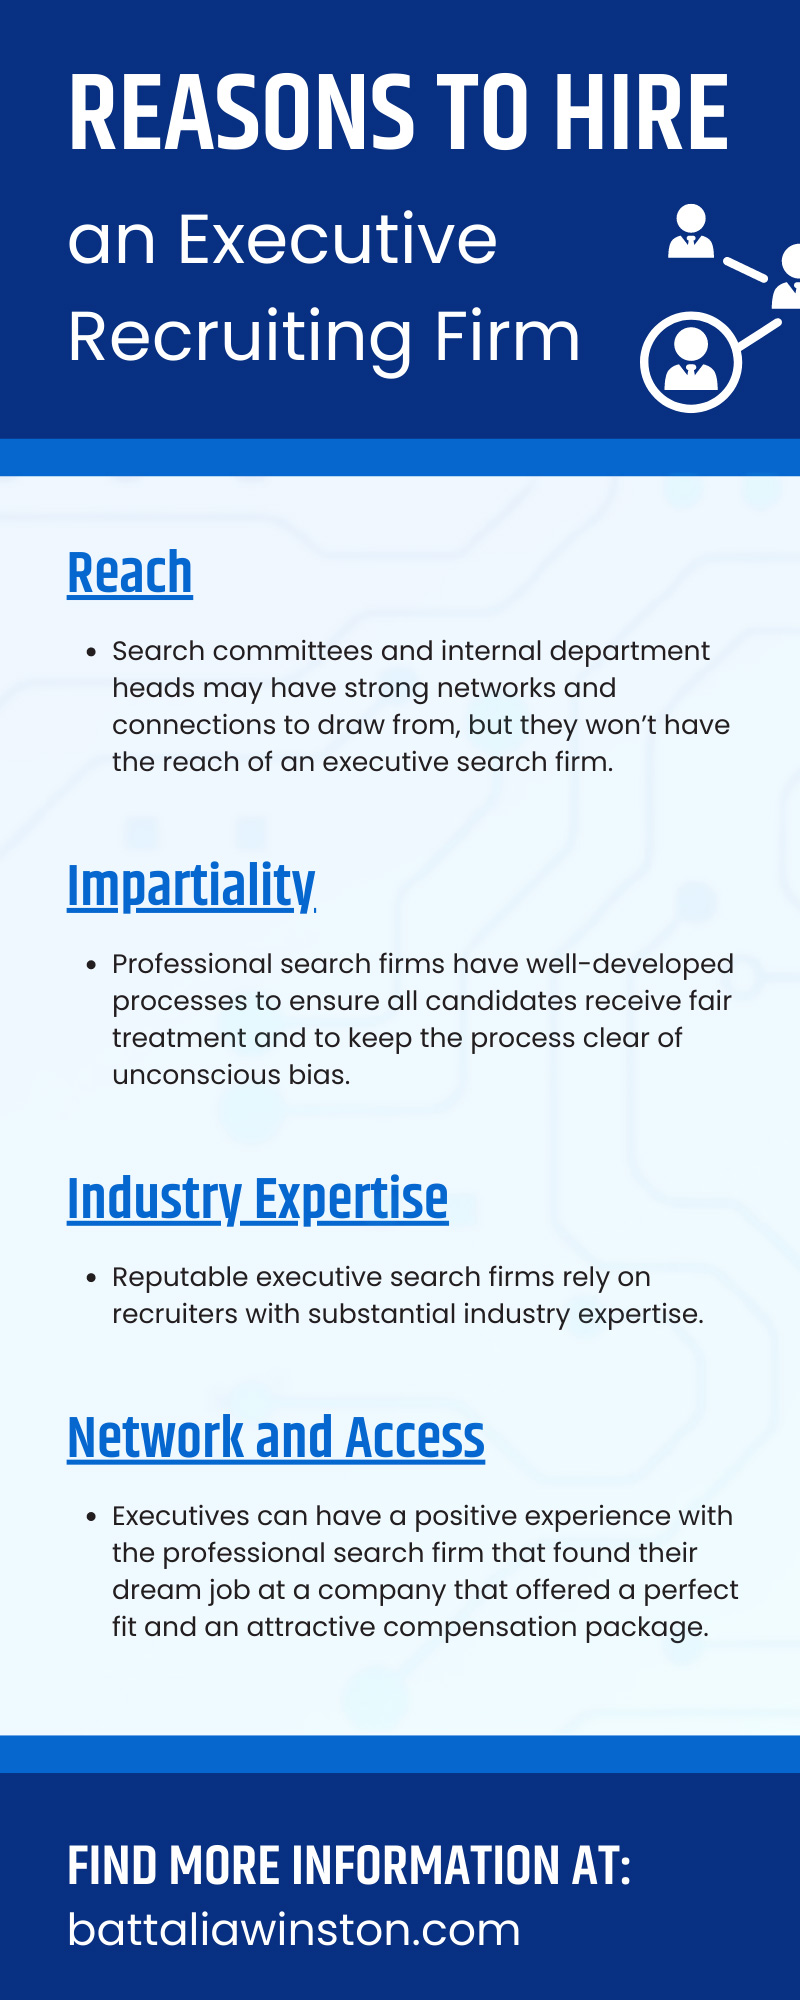 8 Reasons To Hire an Executive Recruiting Firm